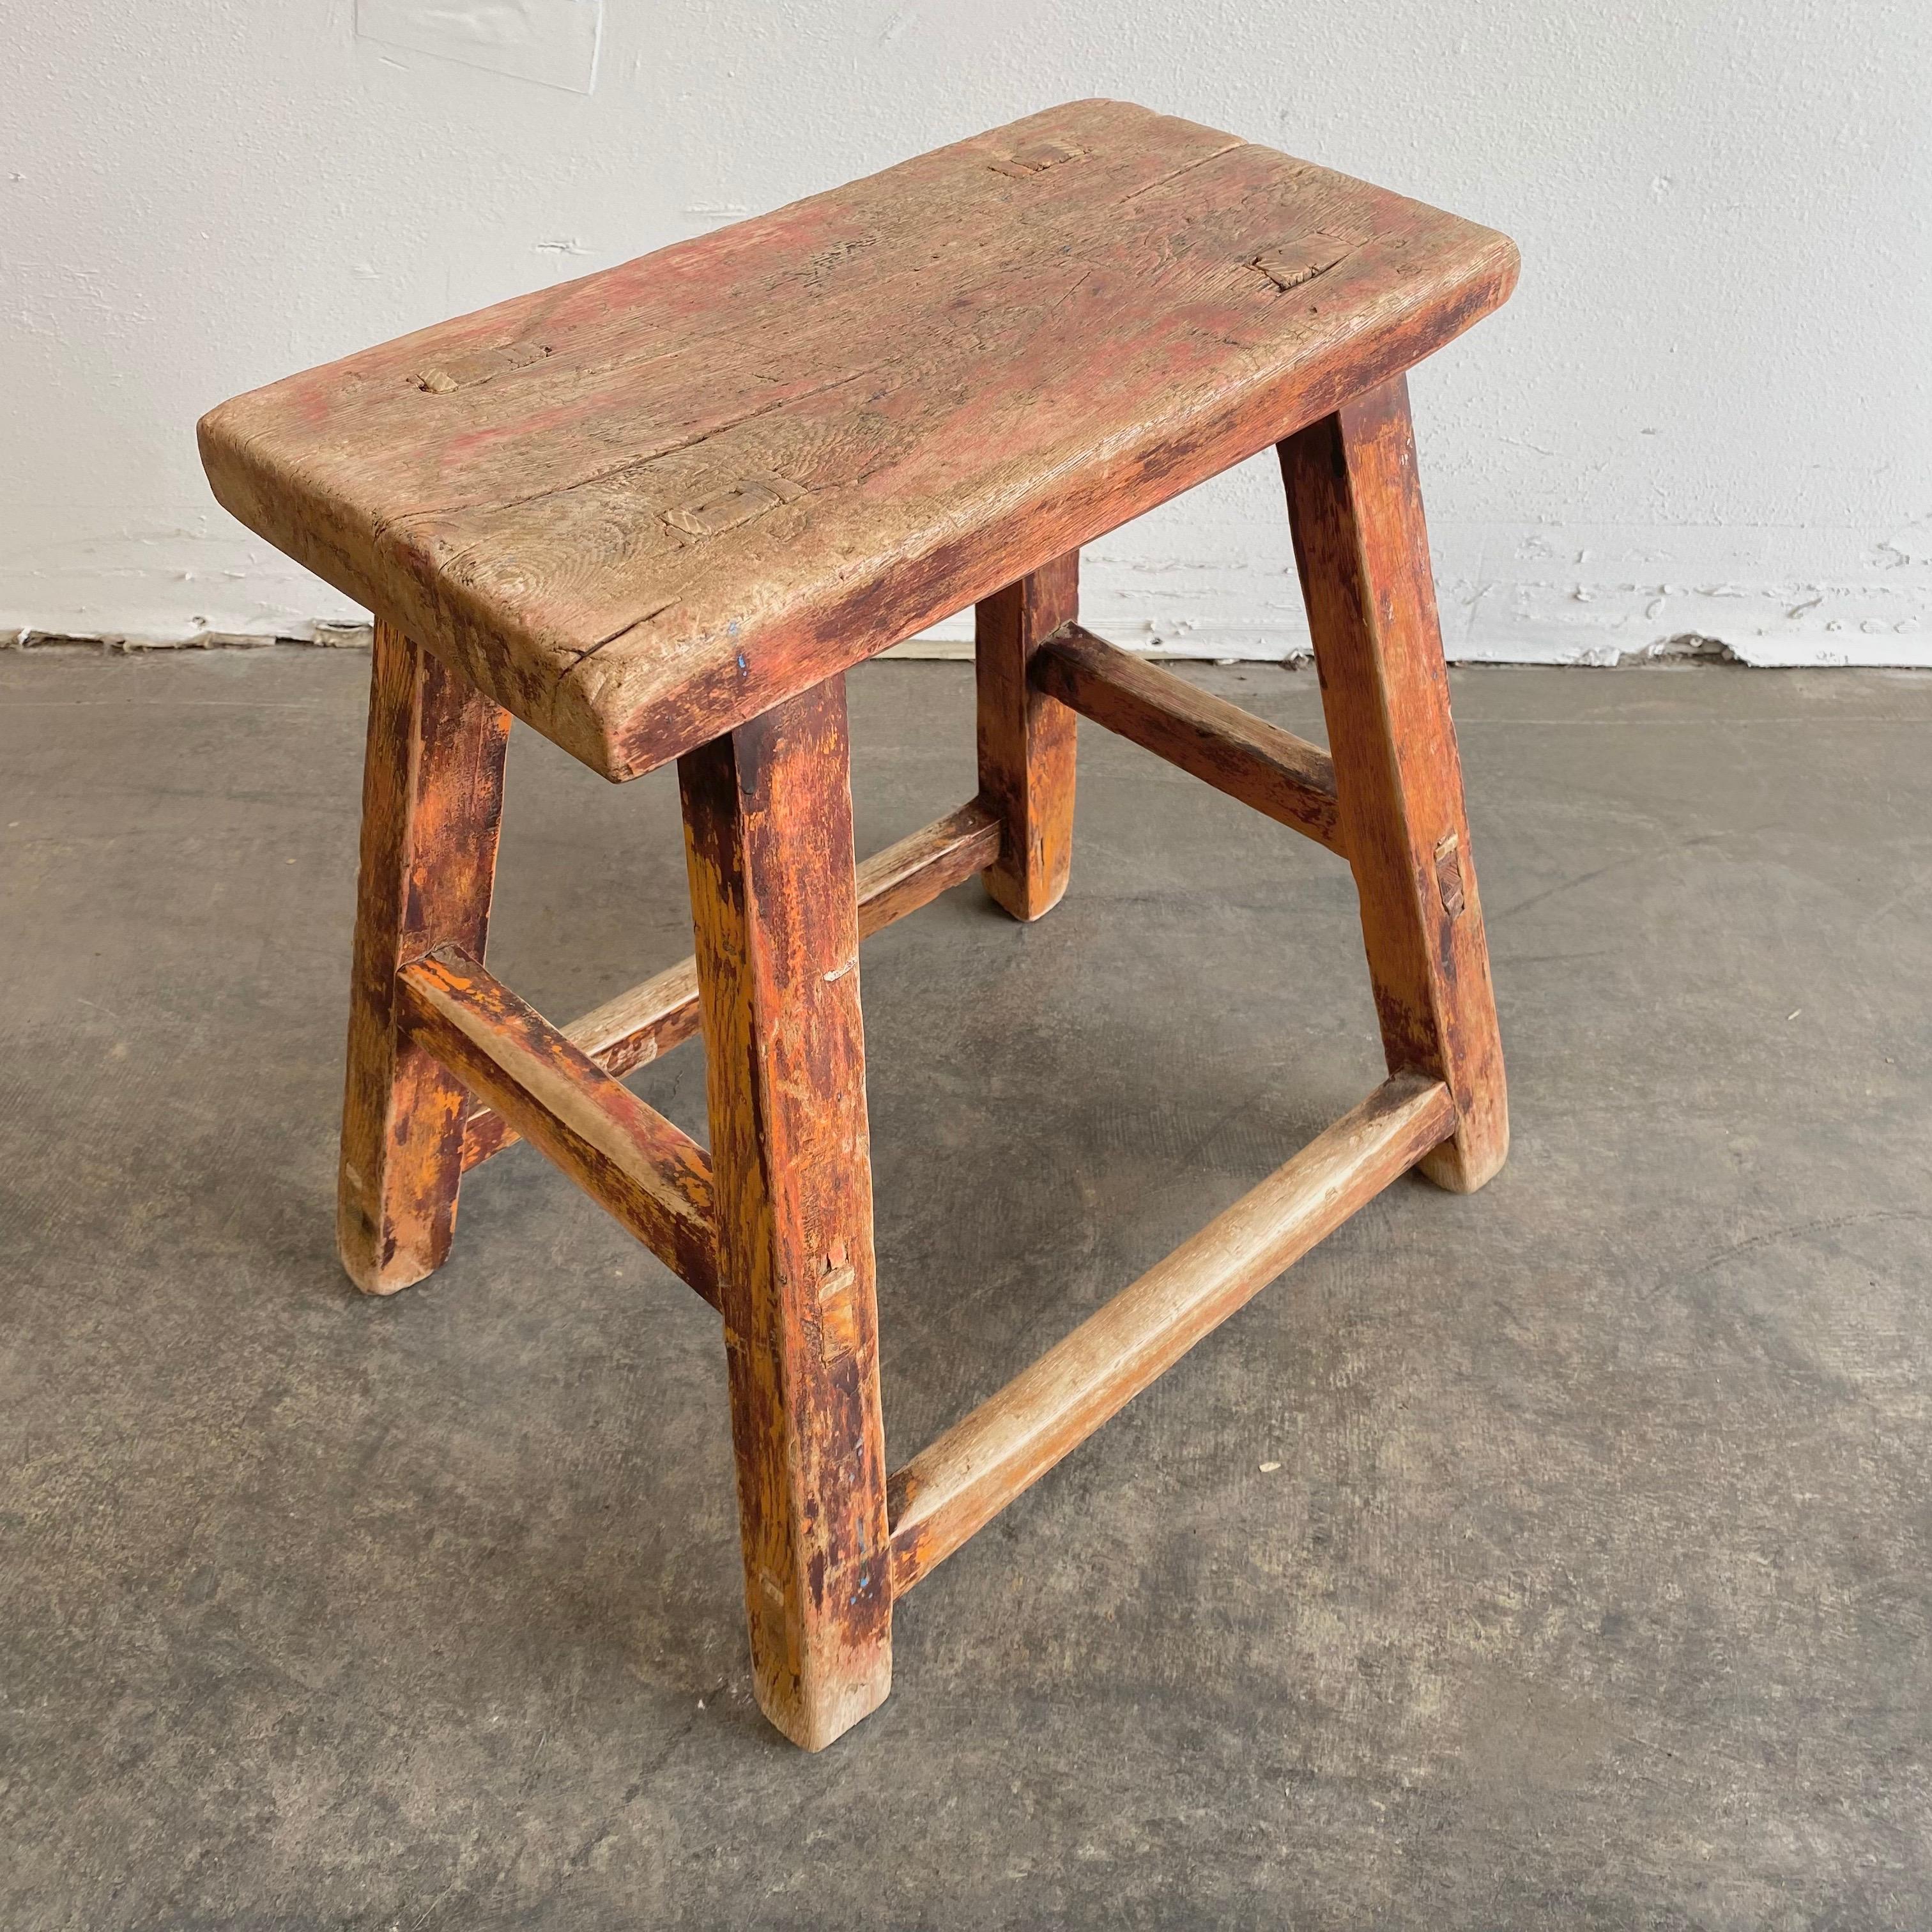 Vintage Antique Elm Wood stool
These are the real vintage antique elm wood stools! Beautiful antique patina, with weathering and age, these are solid and sturdy ready for daily use, use as a table, stool, drink table, they are great for any space.